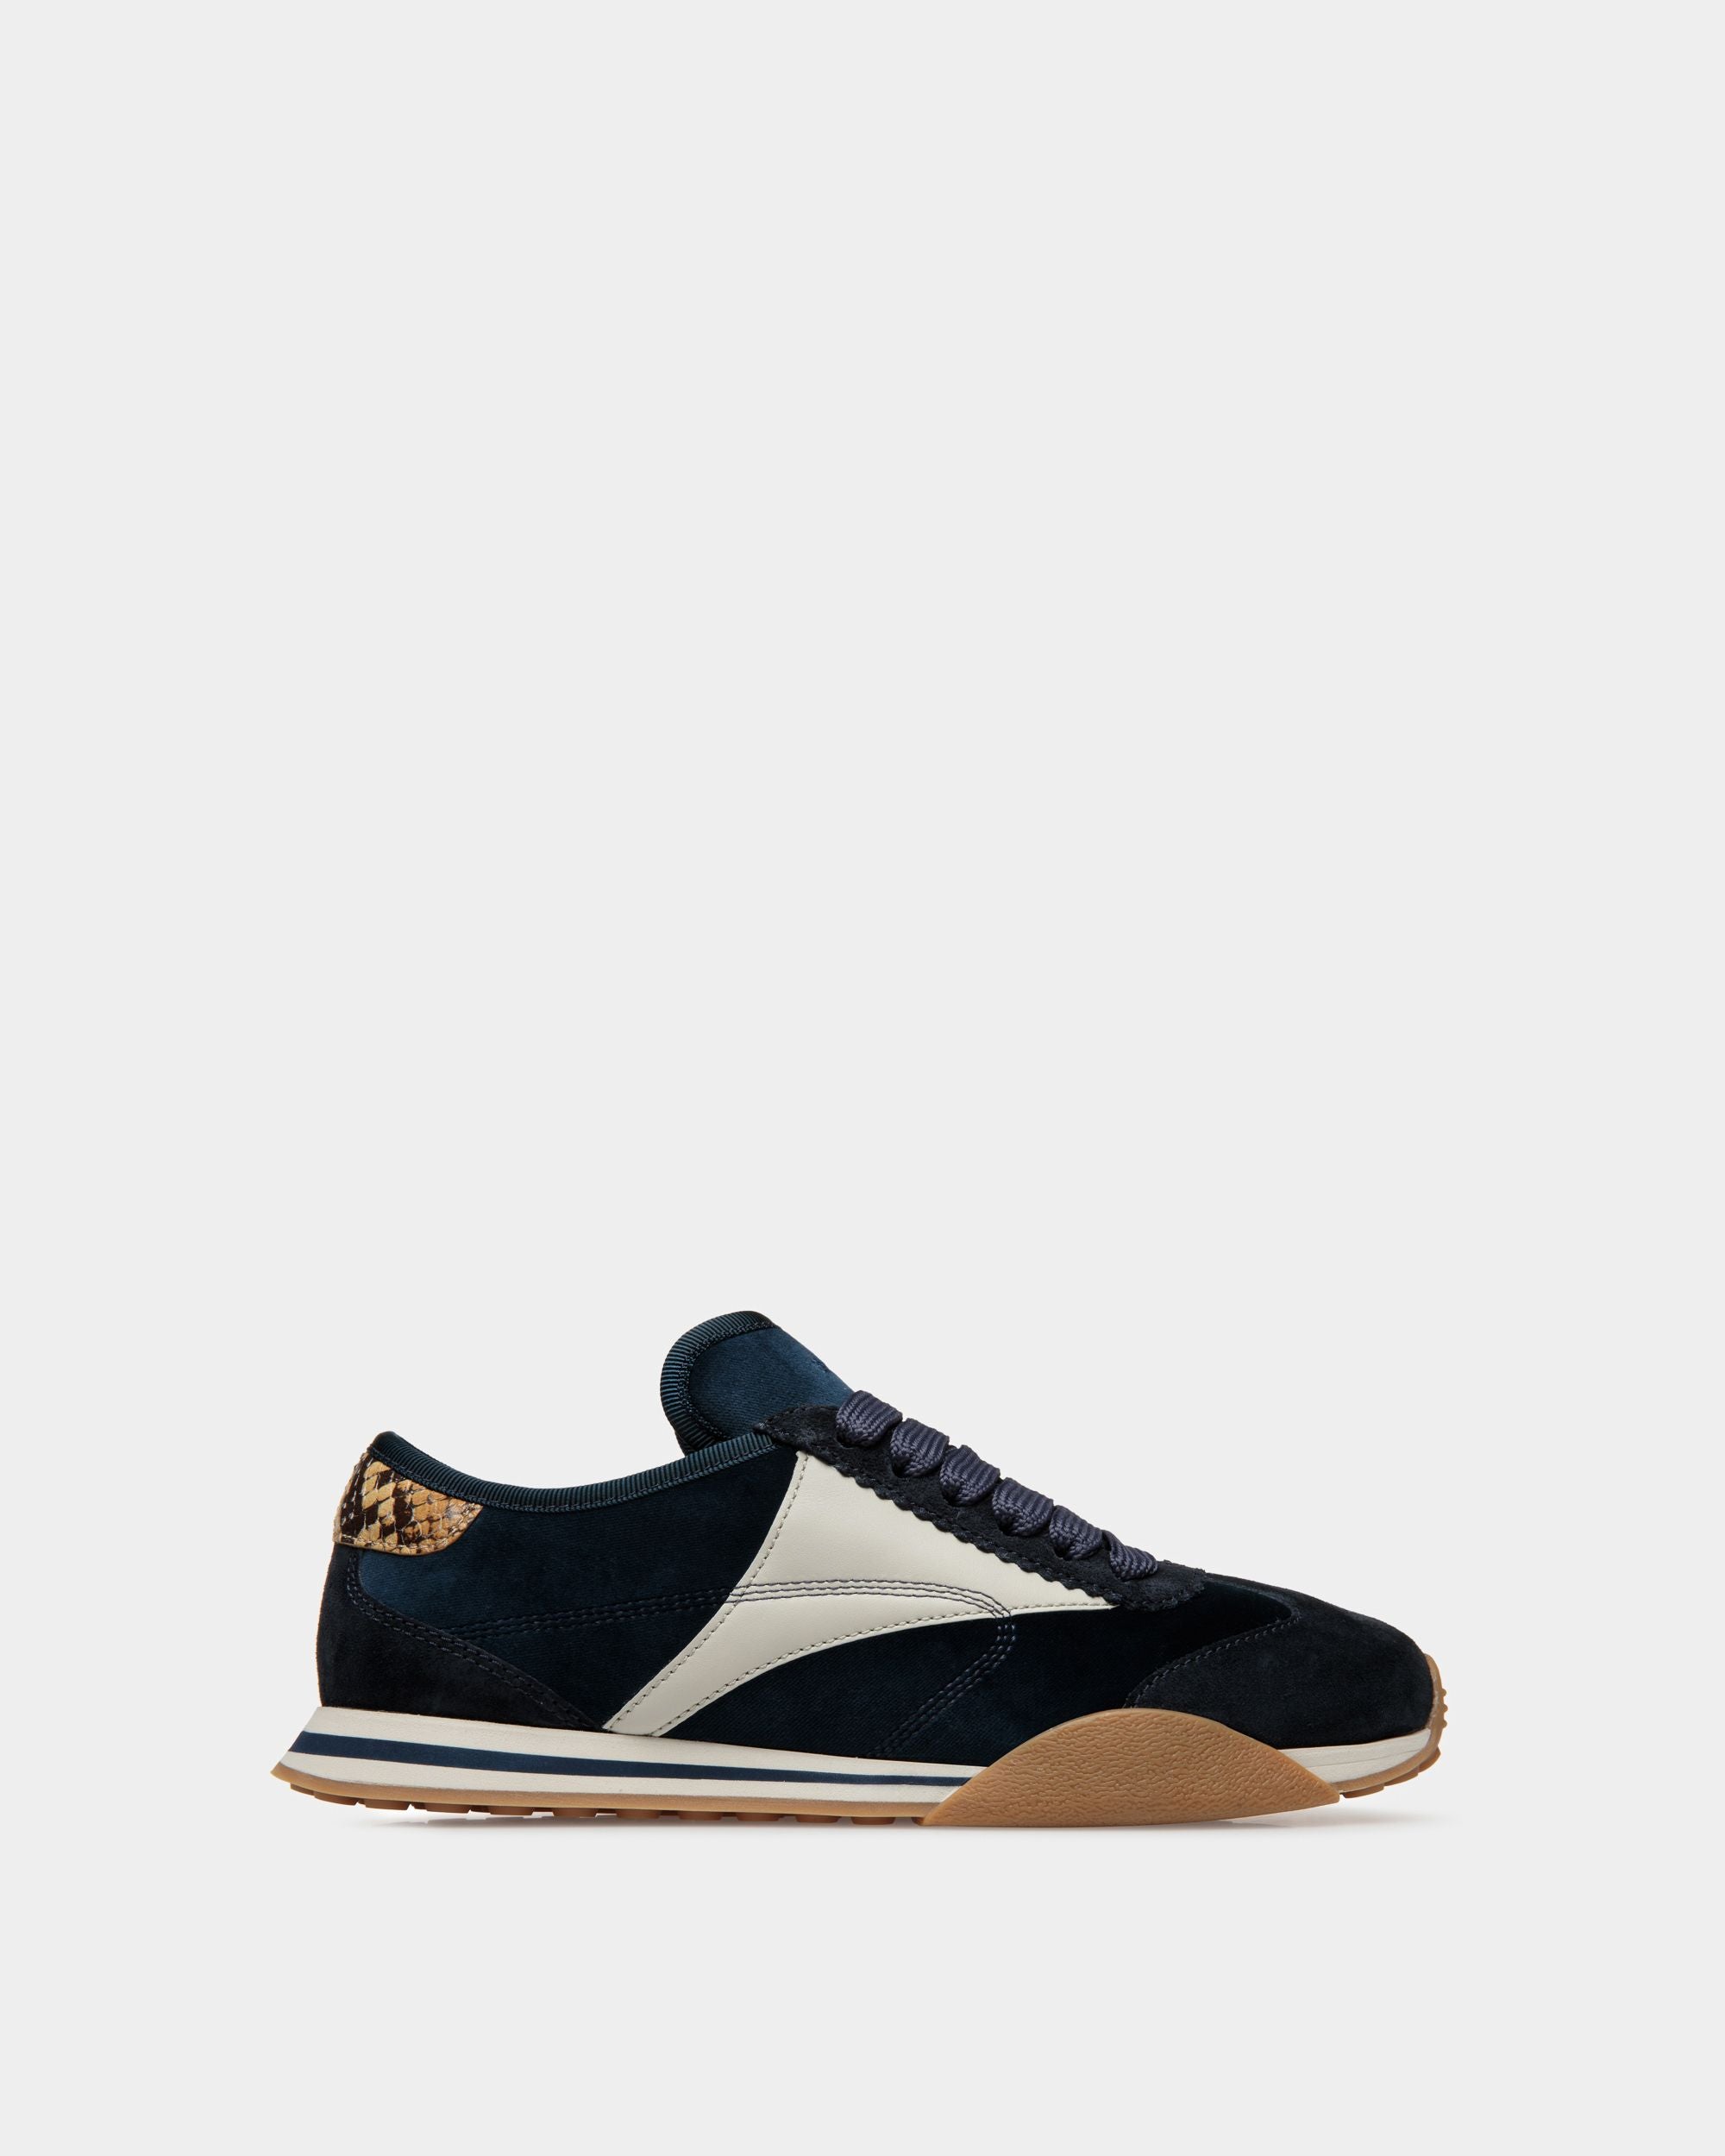 Sonney | Women's Sneakers | Midnight And Dusty White Leather And Cotton | Bally | Still Life Side